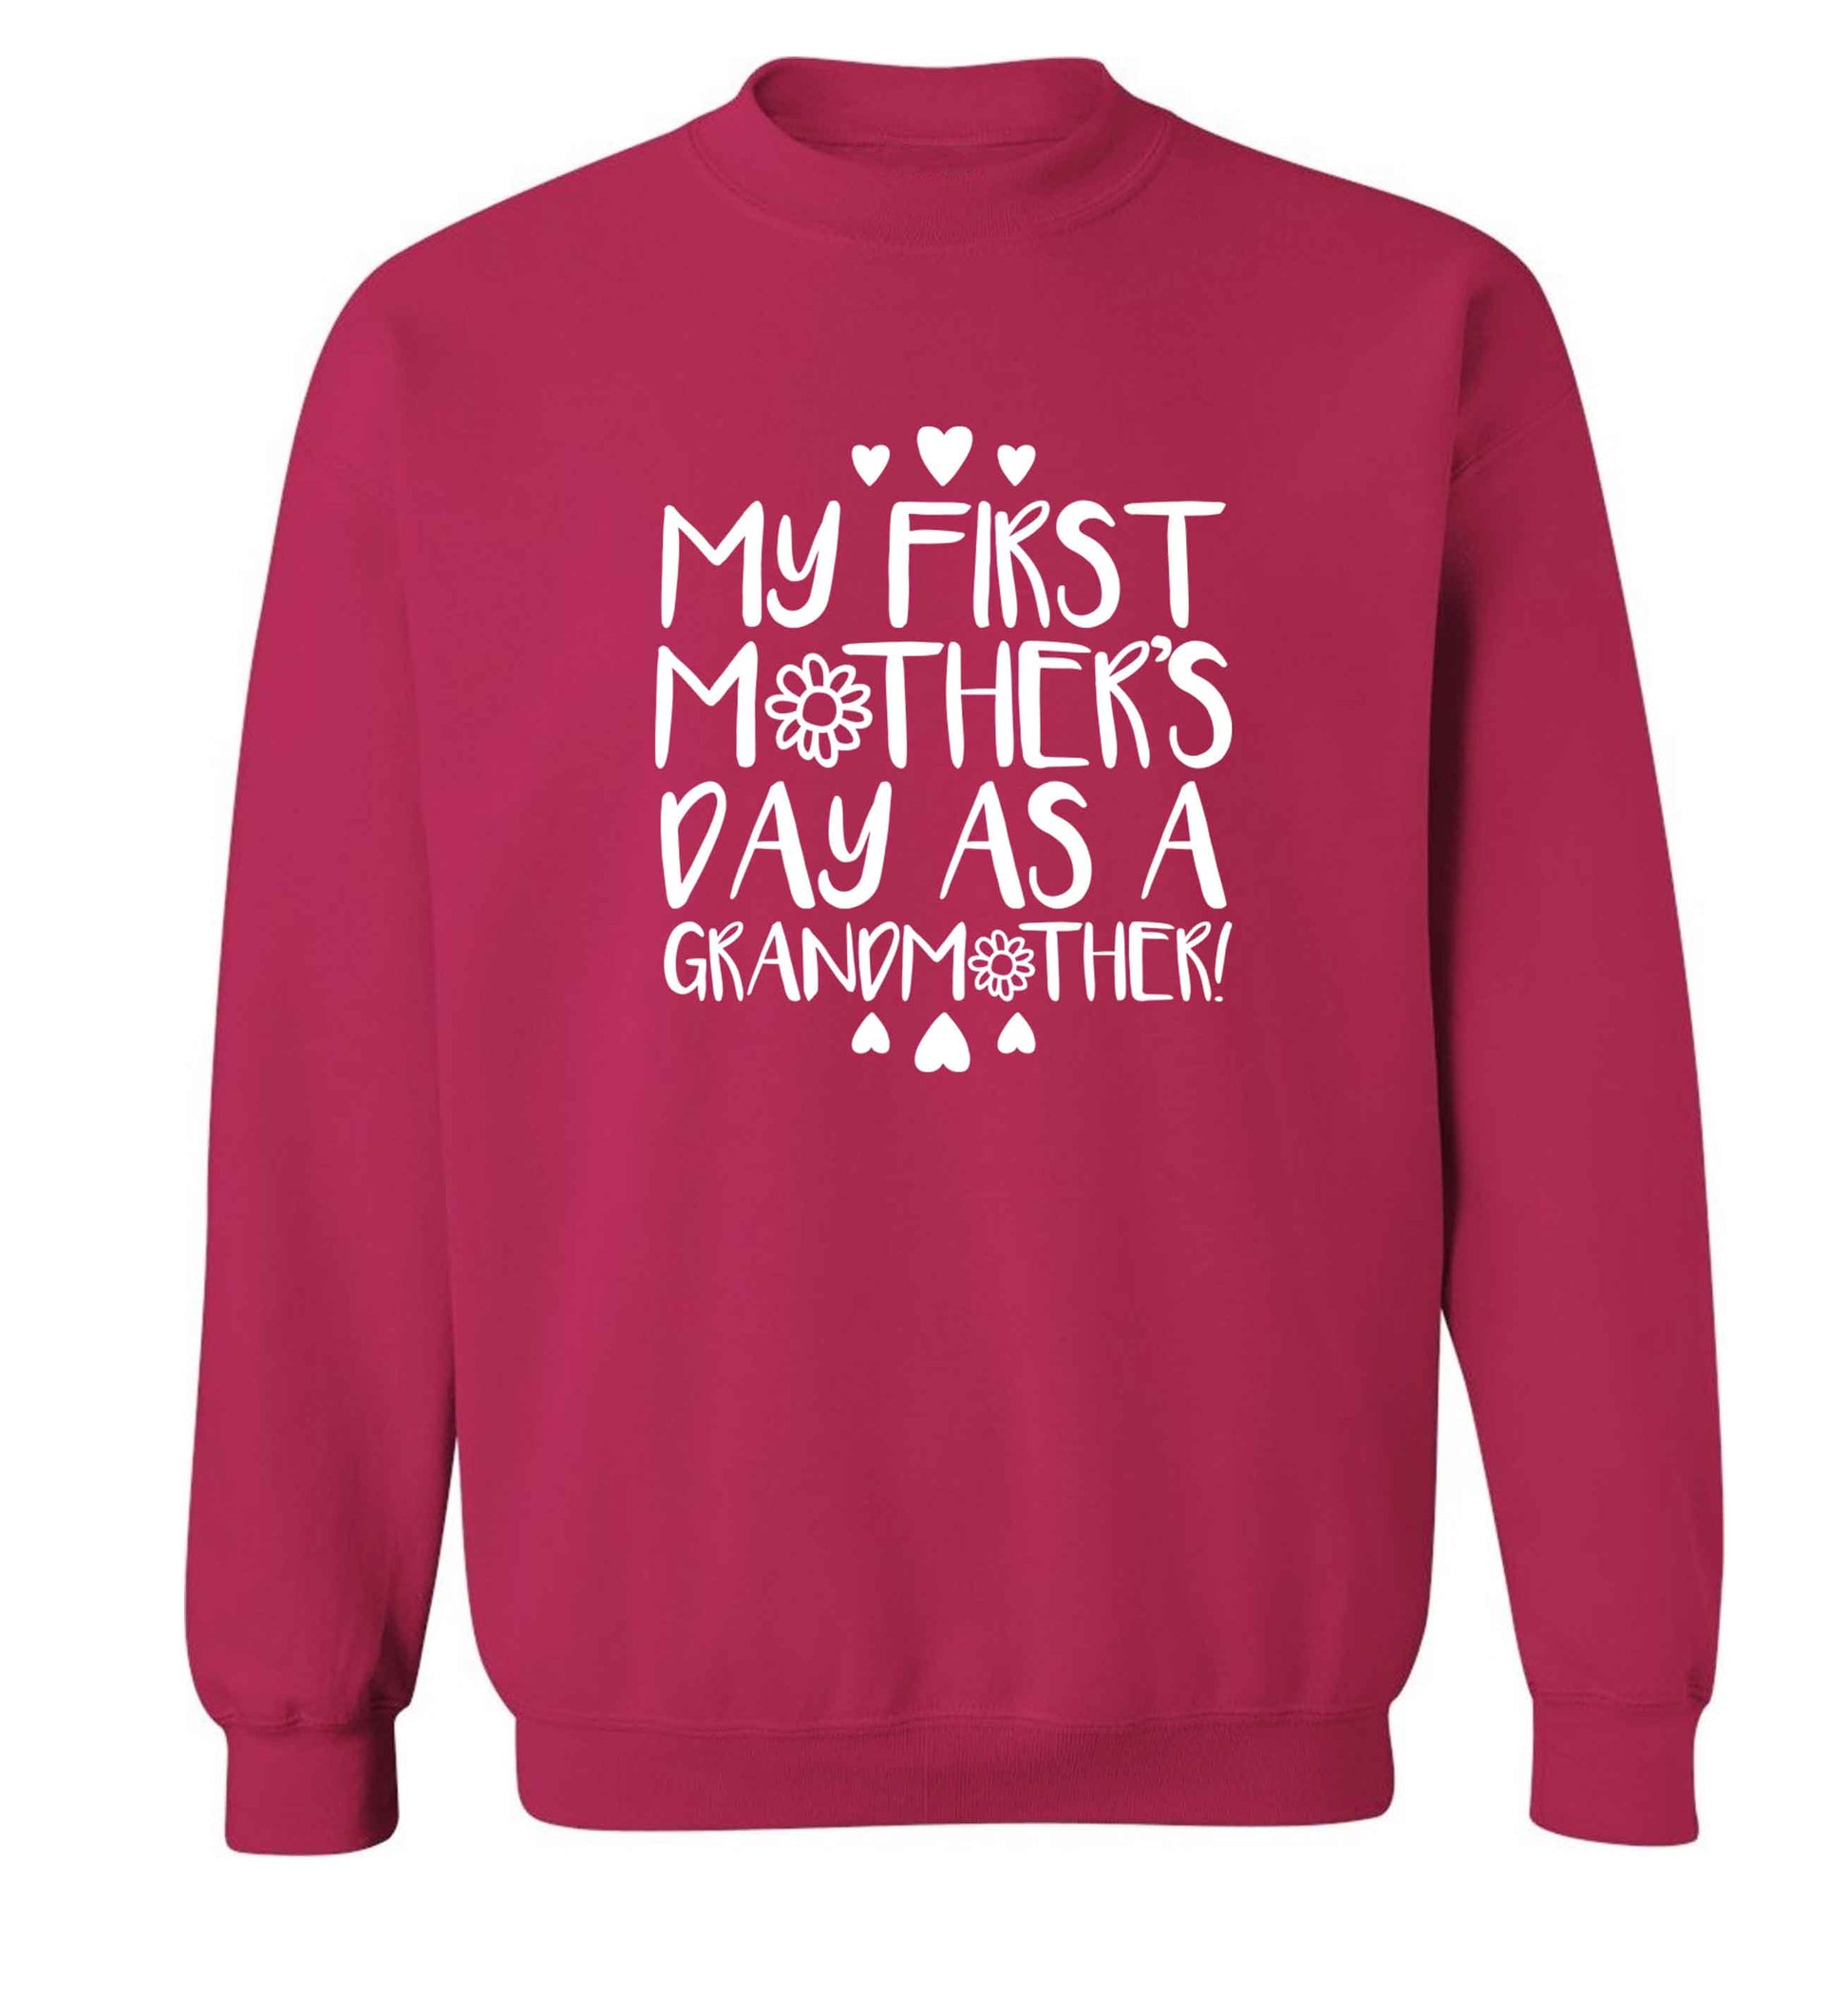 It's my first mother's day as a grandmother adult's unisex pink sweater 2XL